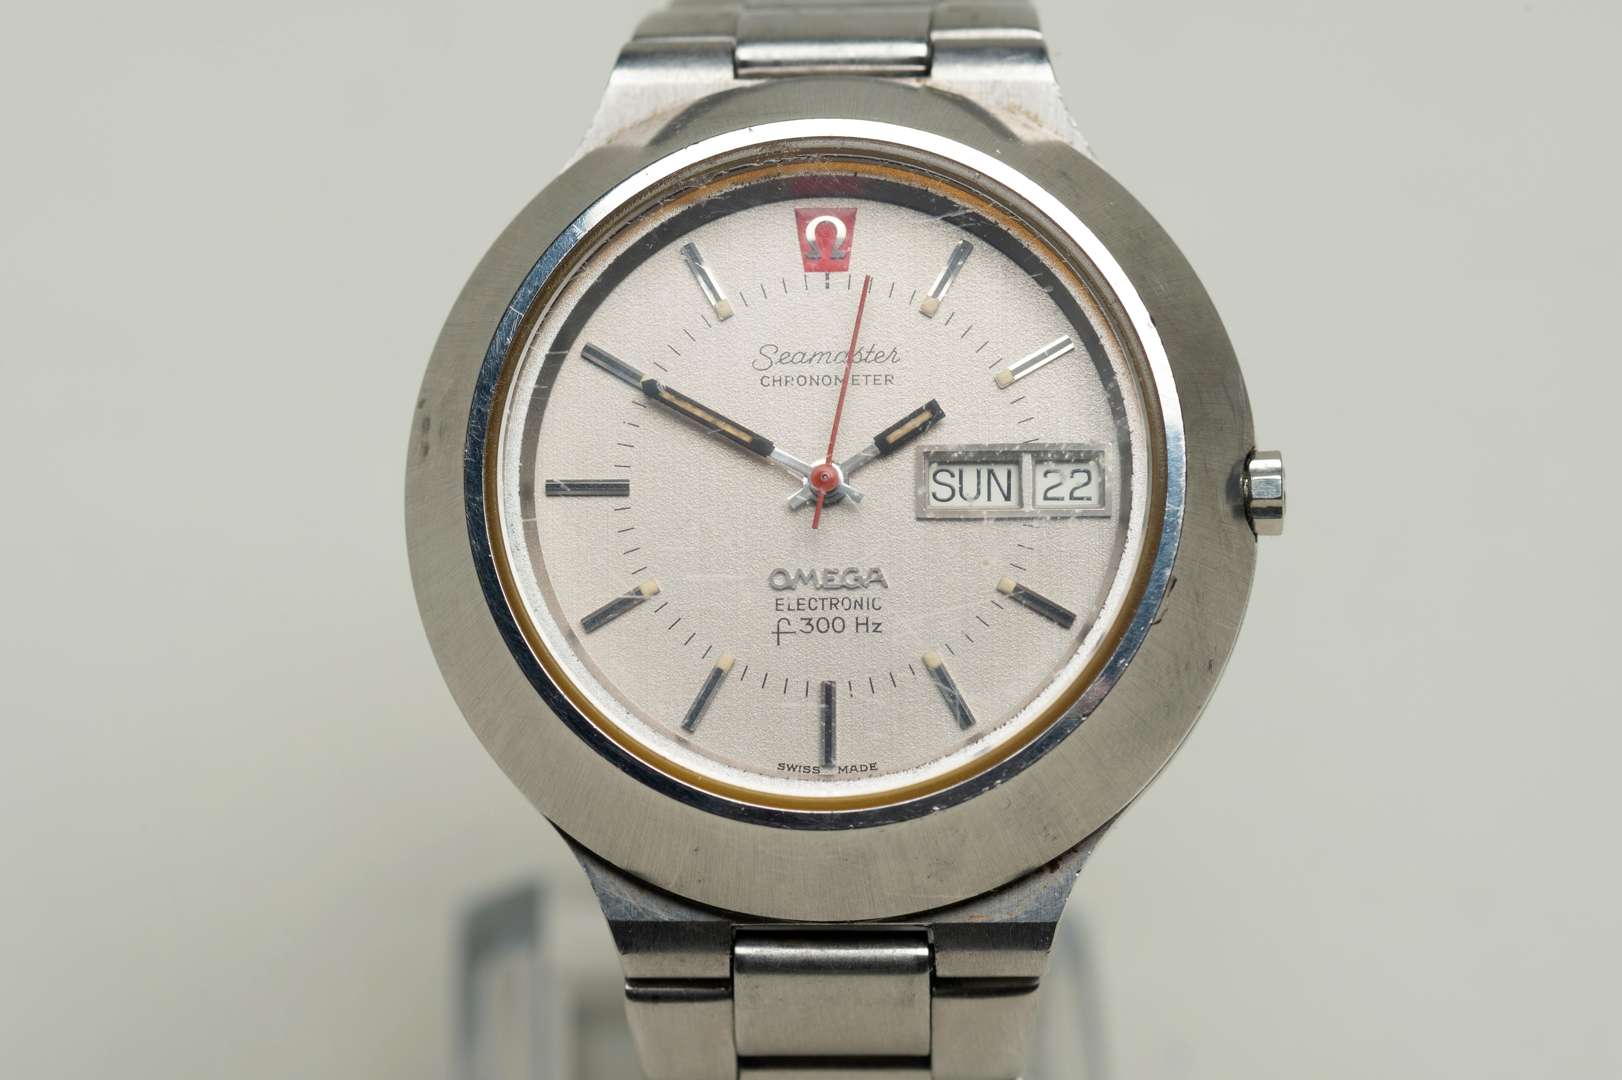 <p>OMEGA, a 1970's Seamaster, Chronometer, Electronic f300 Hz, stainless steel day/date wristwatch.</p>